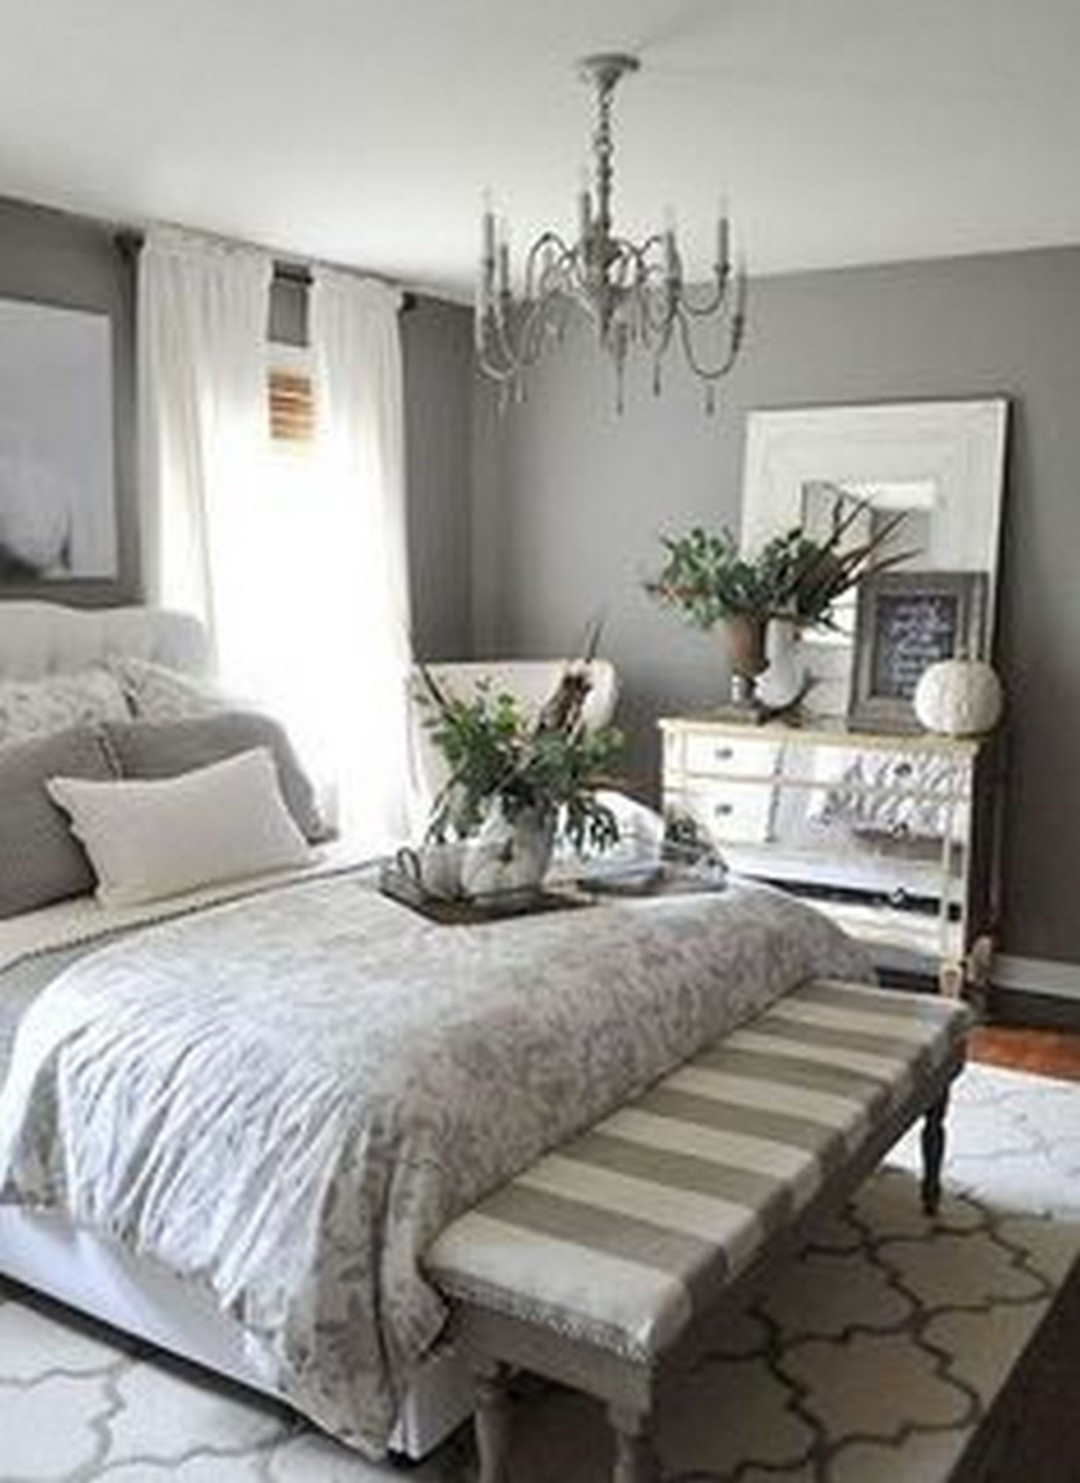 Master Bedroom Bedding
 How to Maximize Bedding Appearance by Applying Farmhouse